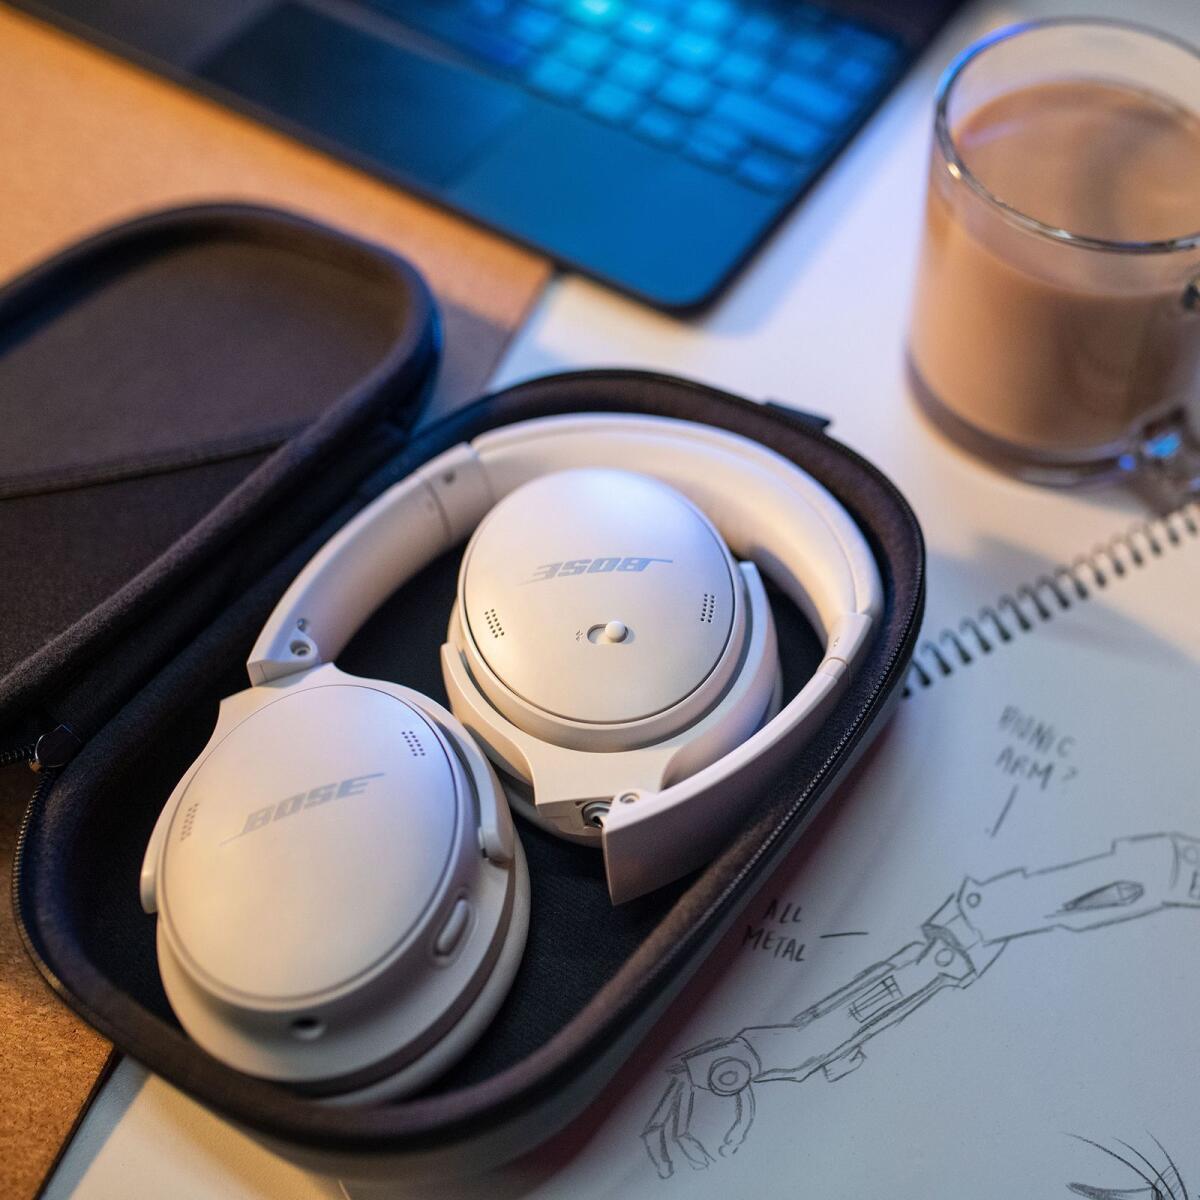 The foldable design of the Bose QuietComfort 45 allows for easy storage in your bag or carry-on luggage, and the lightweight build ensures they won't weigh you down during your travels.